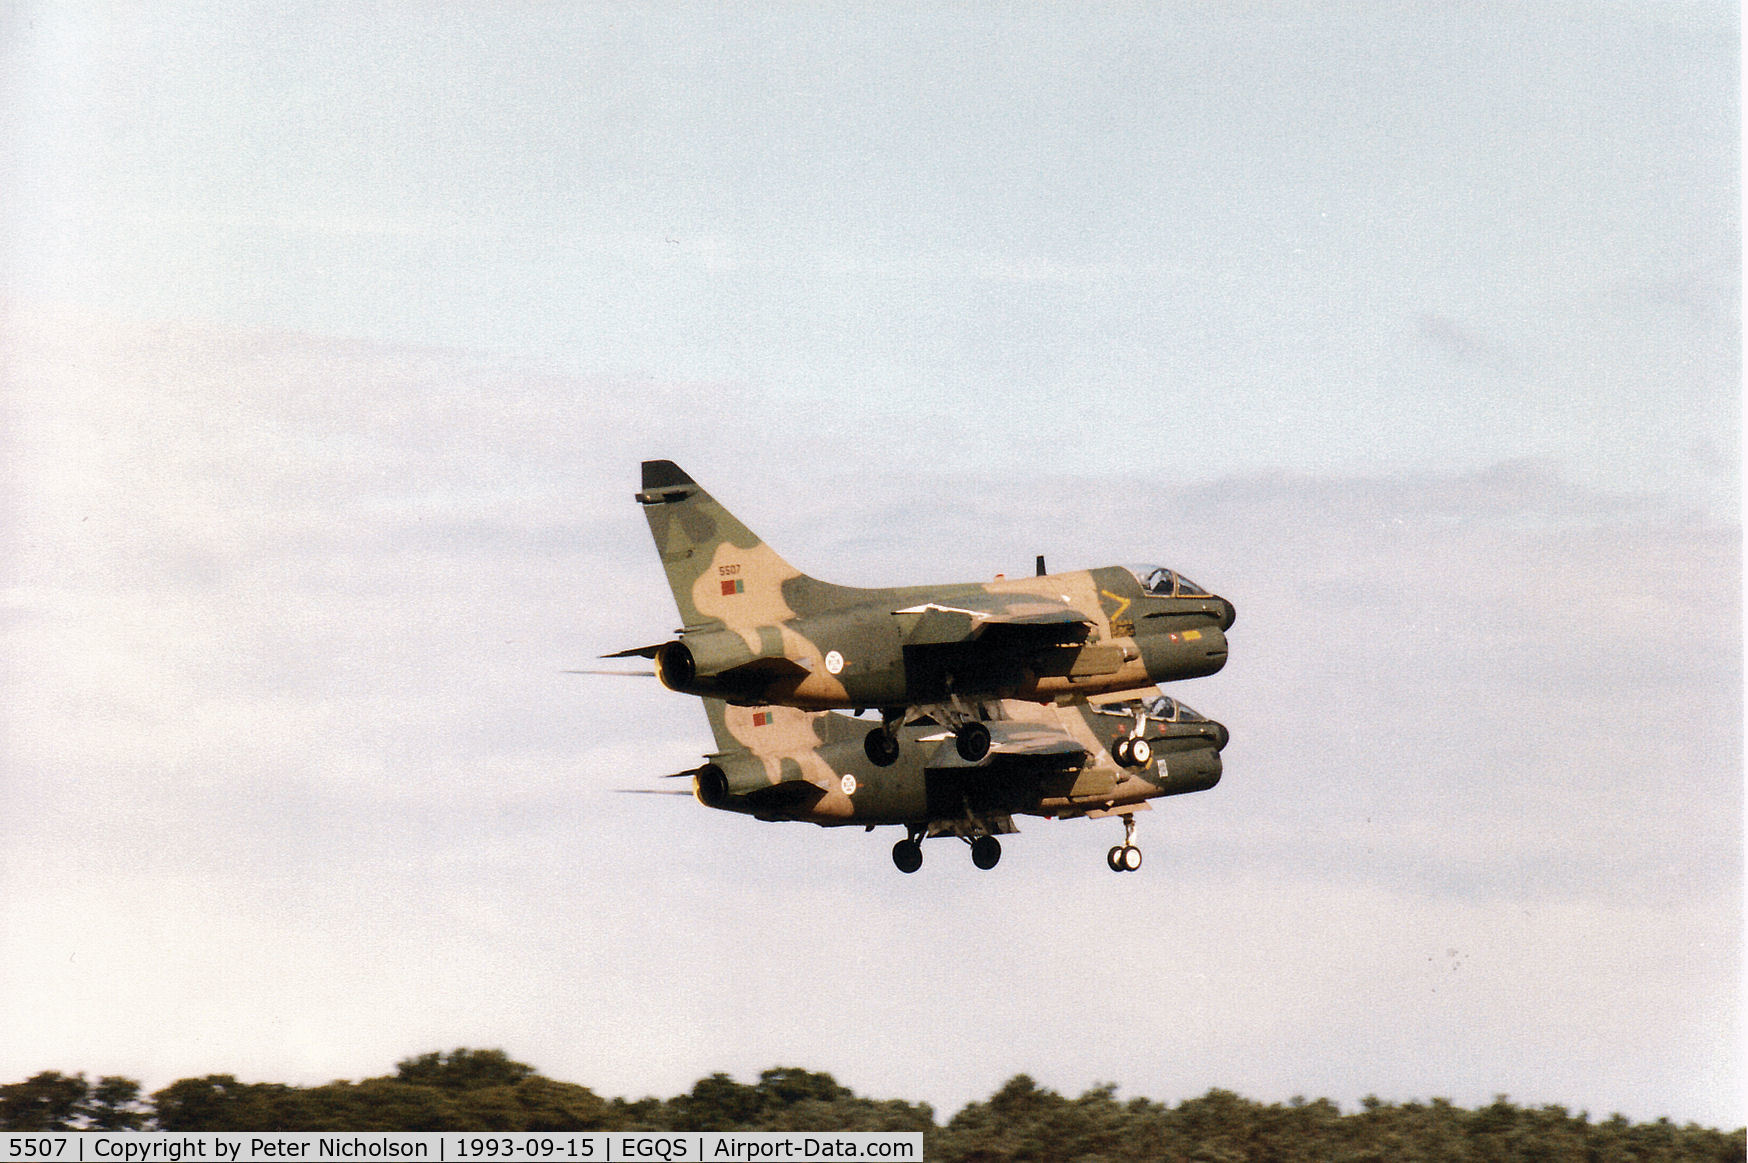 5507, LTV A-7P Corsair II C/N A-103/P-007, Portuguese A-7P Corsair II of 304 Esquadron with TA-7P Corsair II 5548 on paired approach to Runway 23 at RAF Lossiemouth in September 1993.